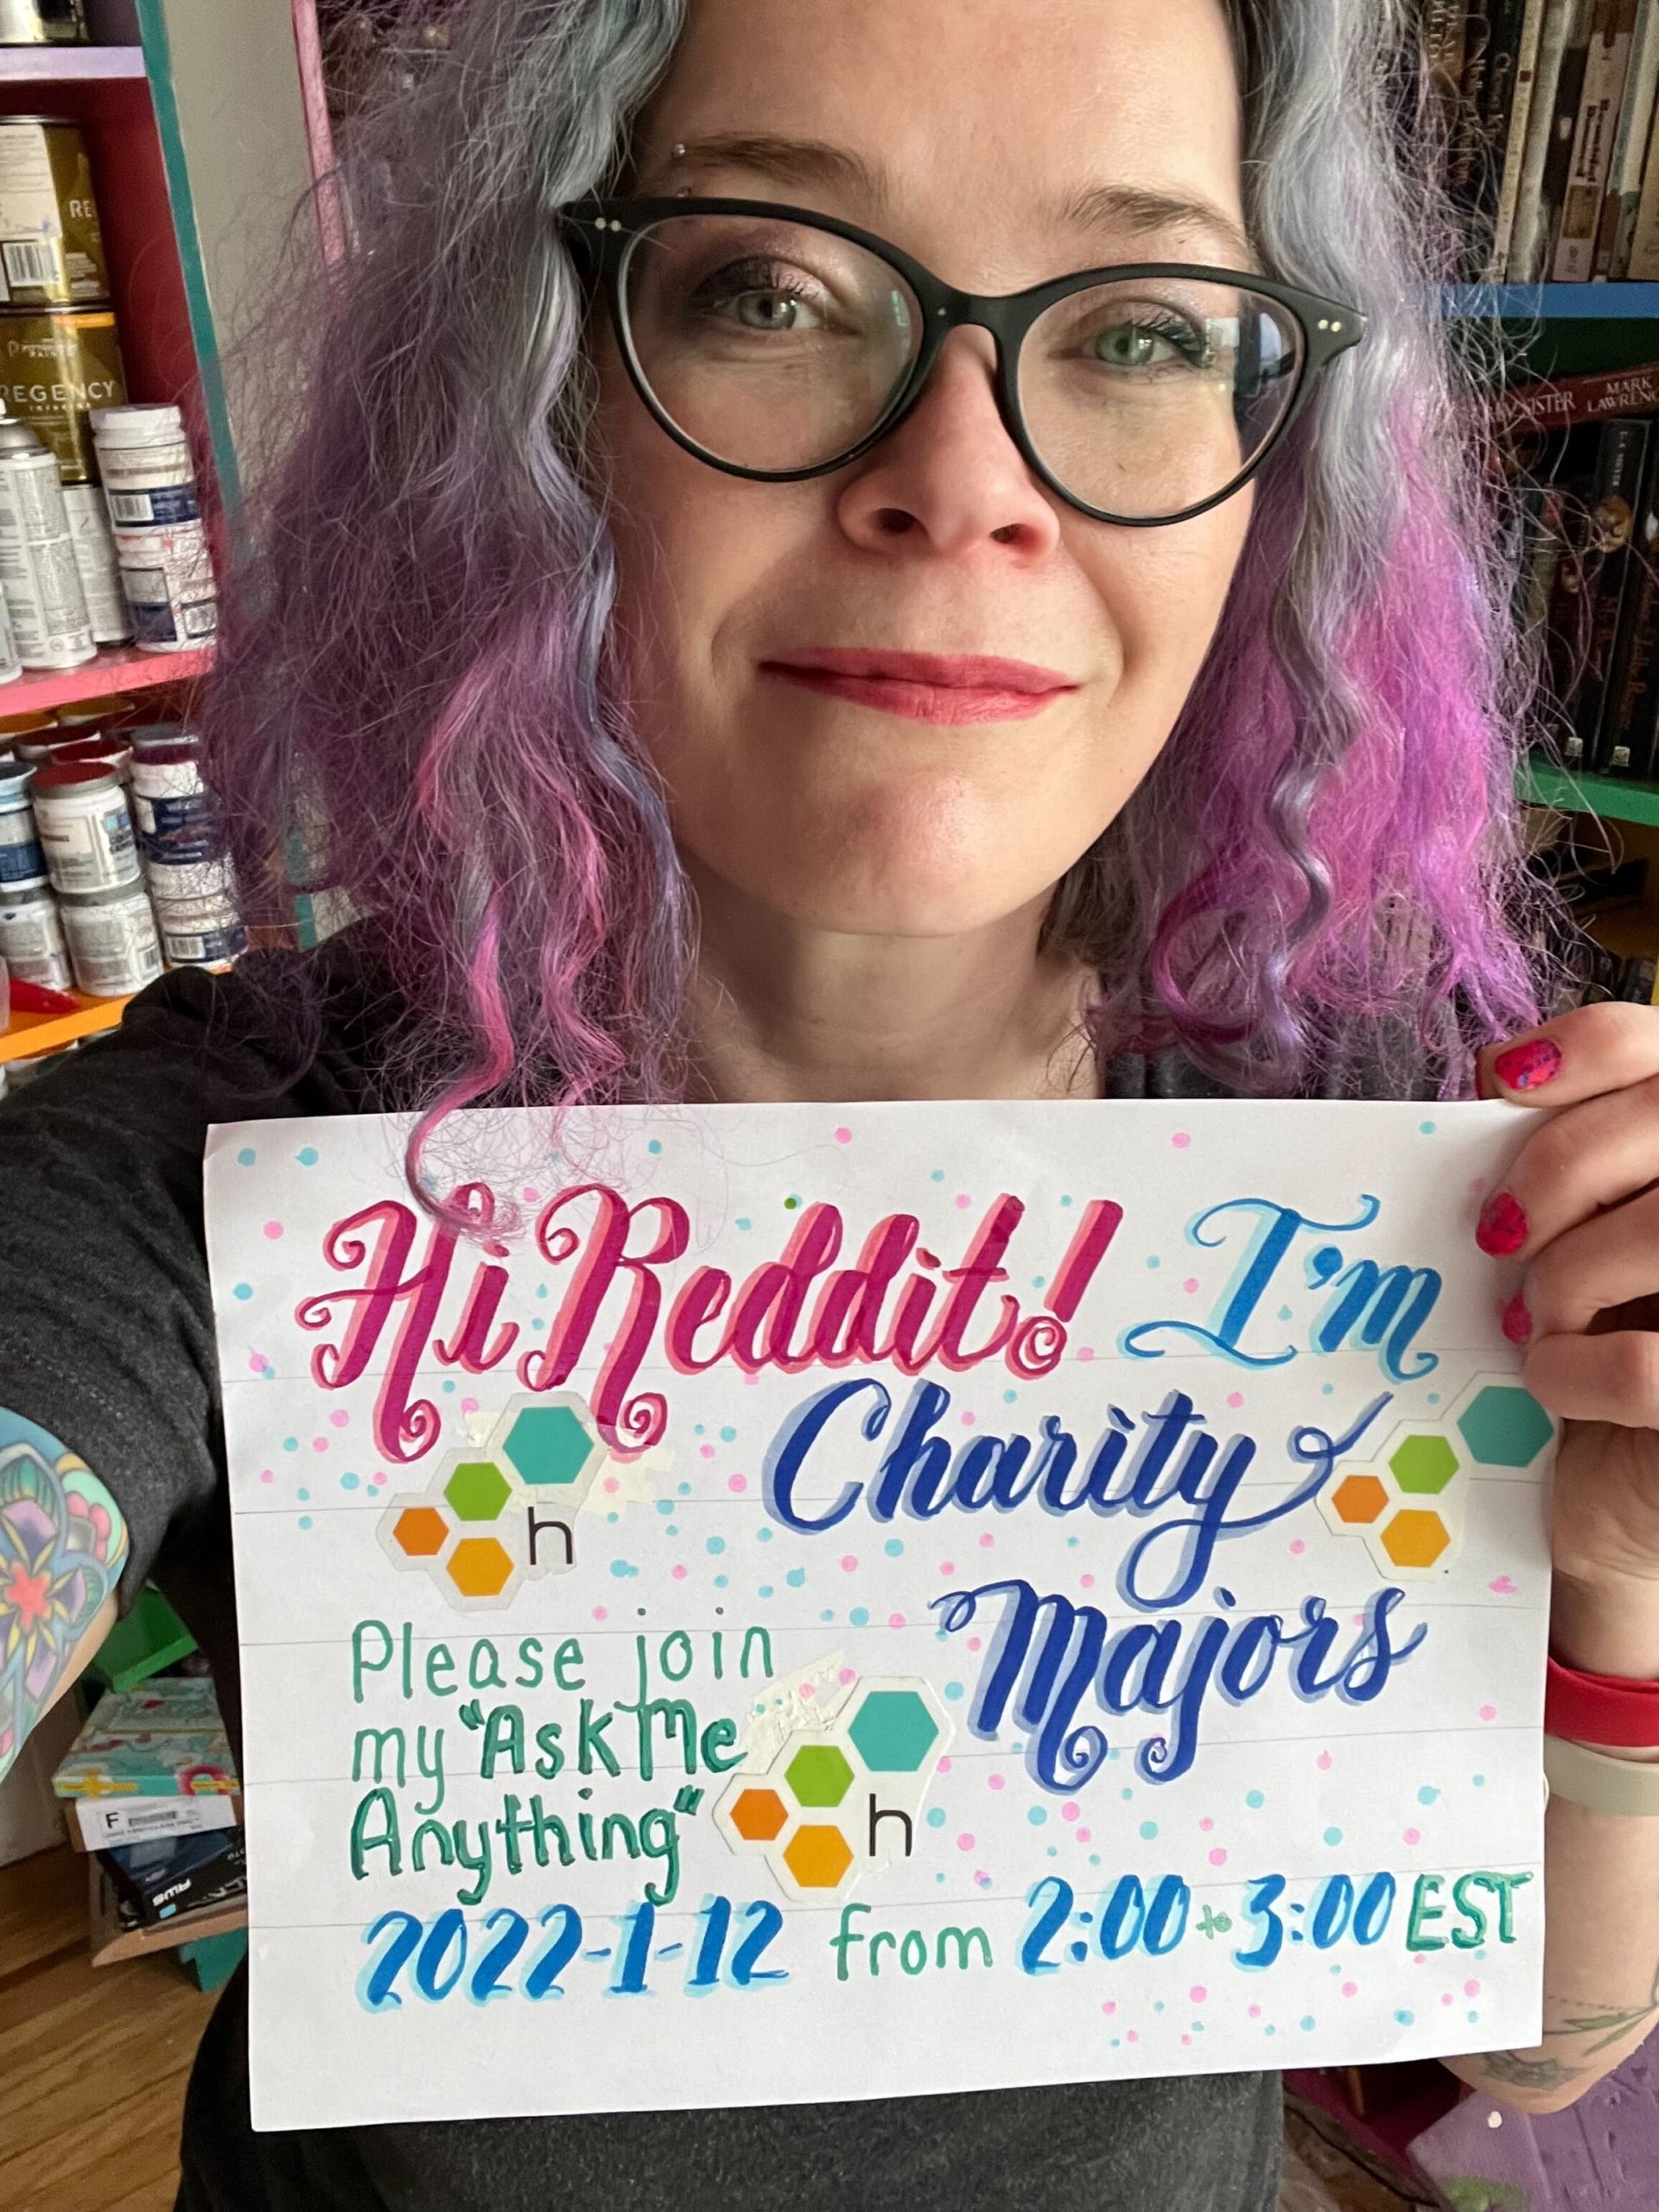 charity majors holding sign inviting reddit to join ama january 12, 2022